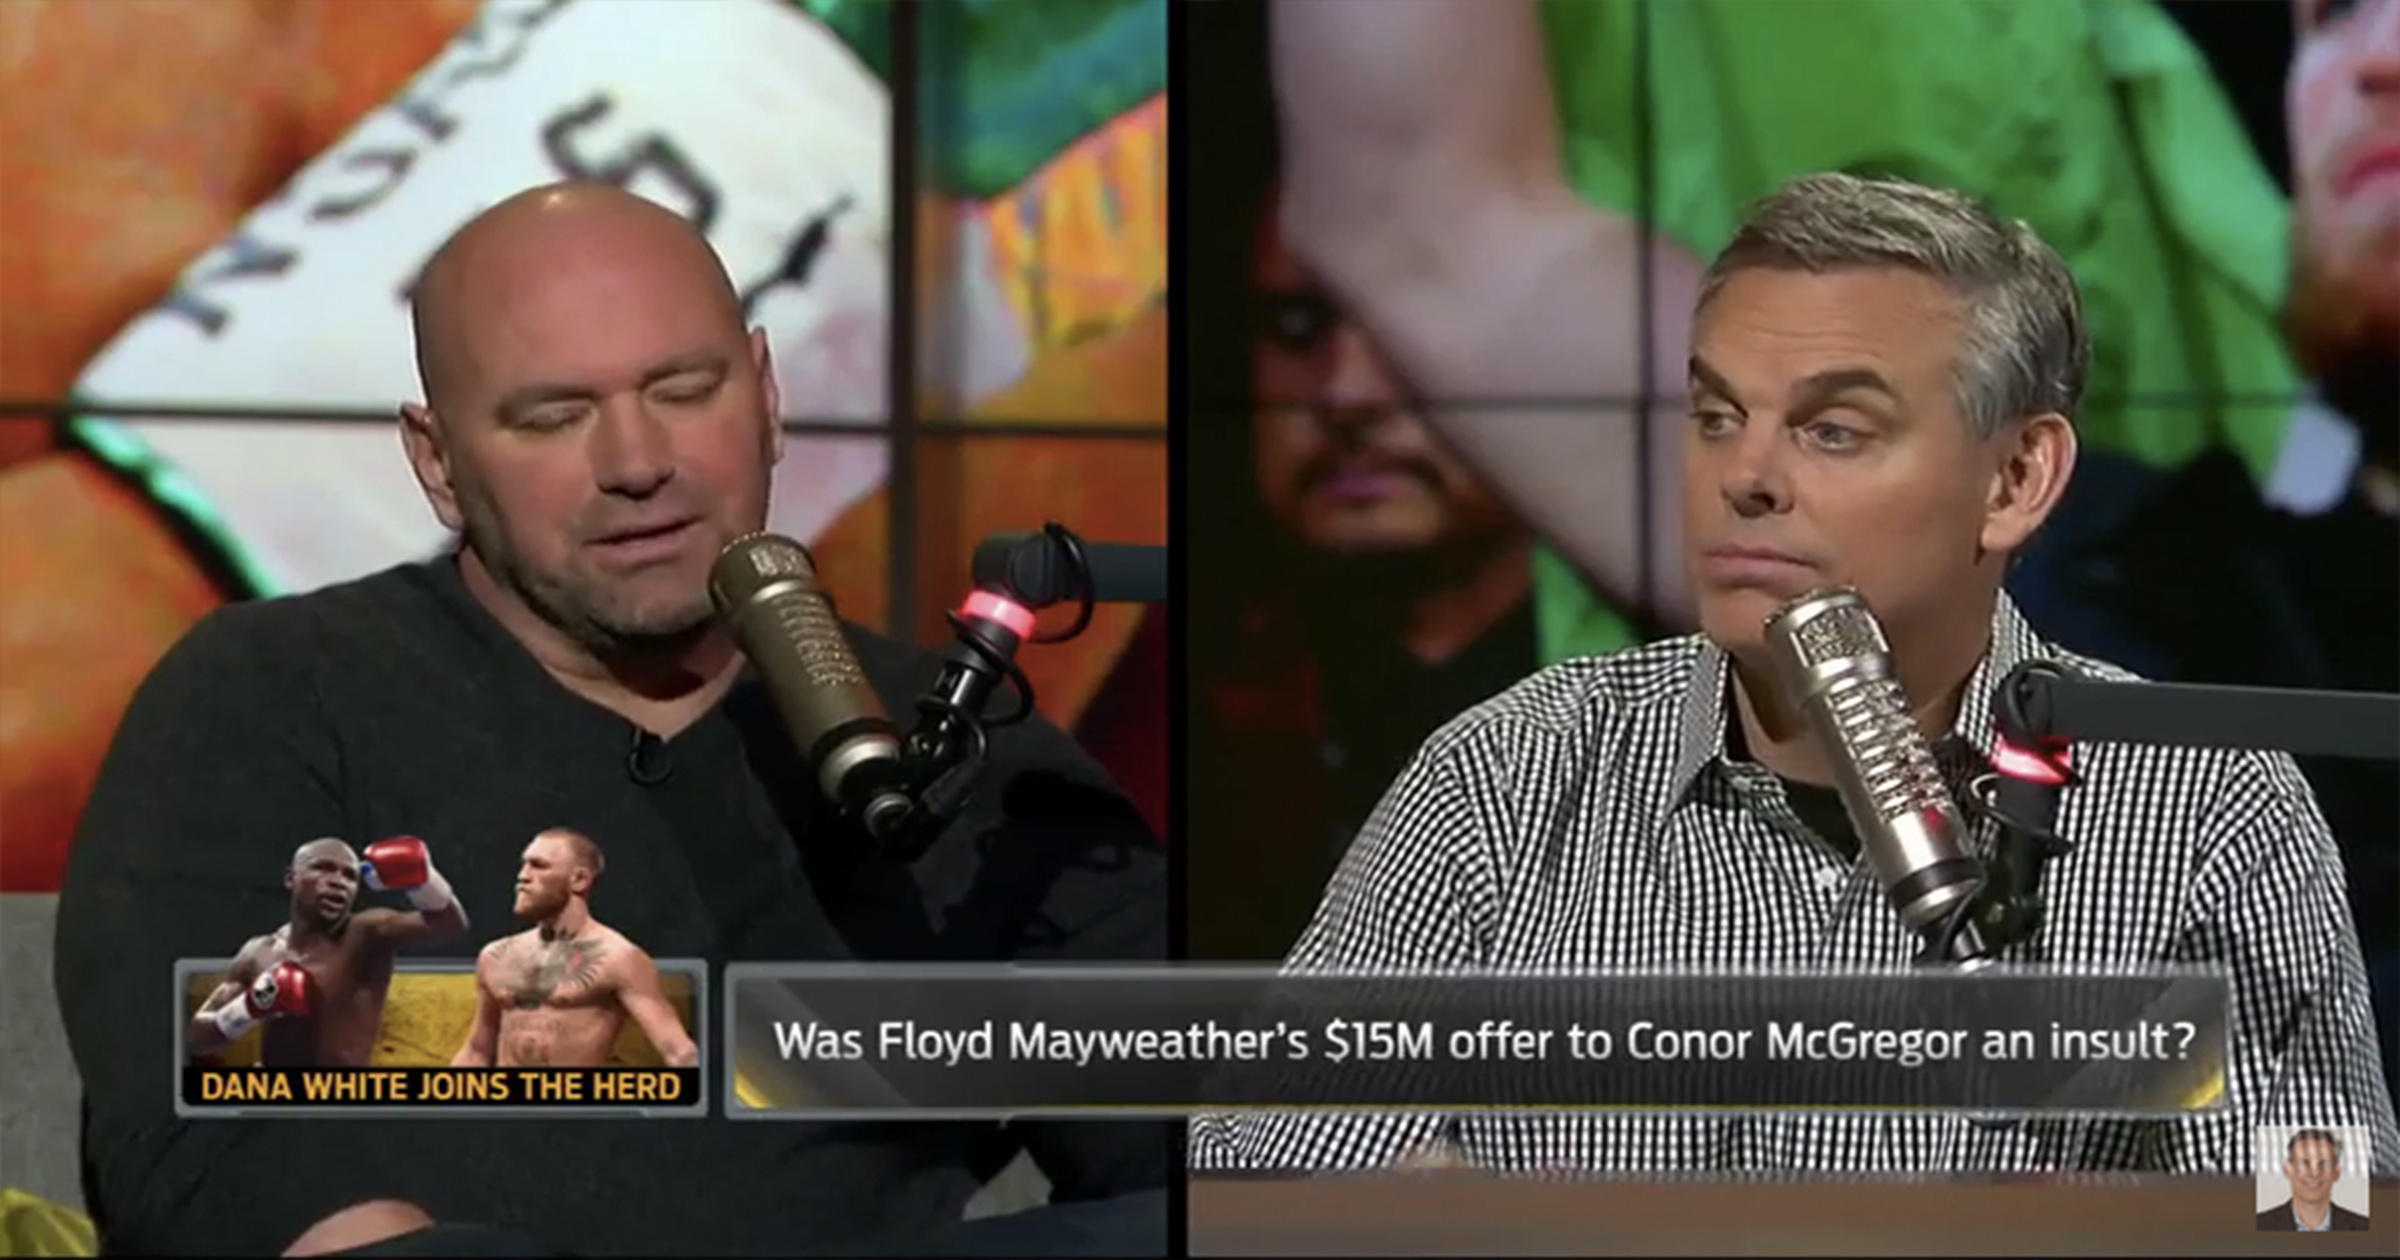 WATCH: Dana White confirms The UFC's MASSIVE offer to Conor McGregor & Floyd Mayweather.2400 x 1260